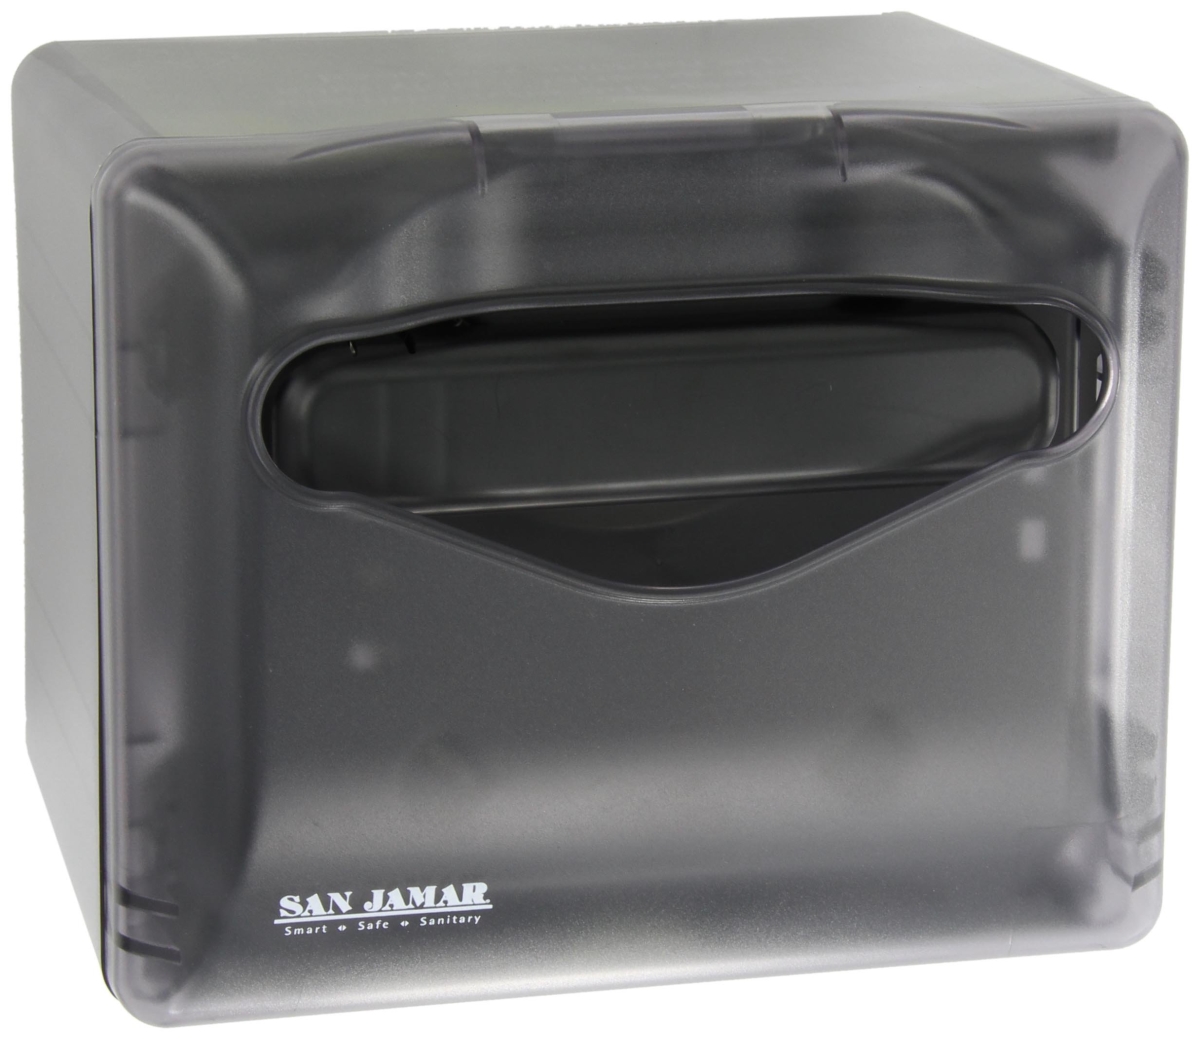 Picture of San Jamar H4005TBK 6.5 x 6.12 x 6.8 in. Capacity - 200, Venue Napkin Dispenser with Advertising Inset - Black